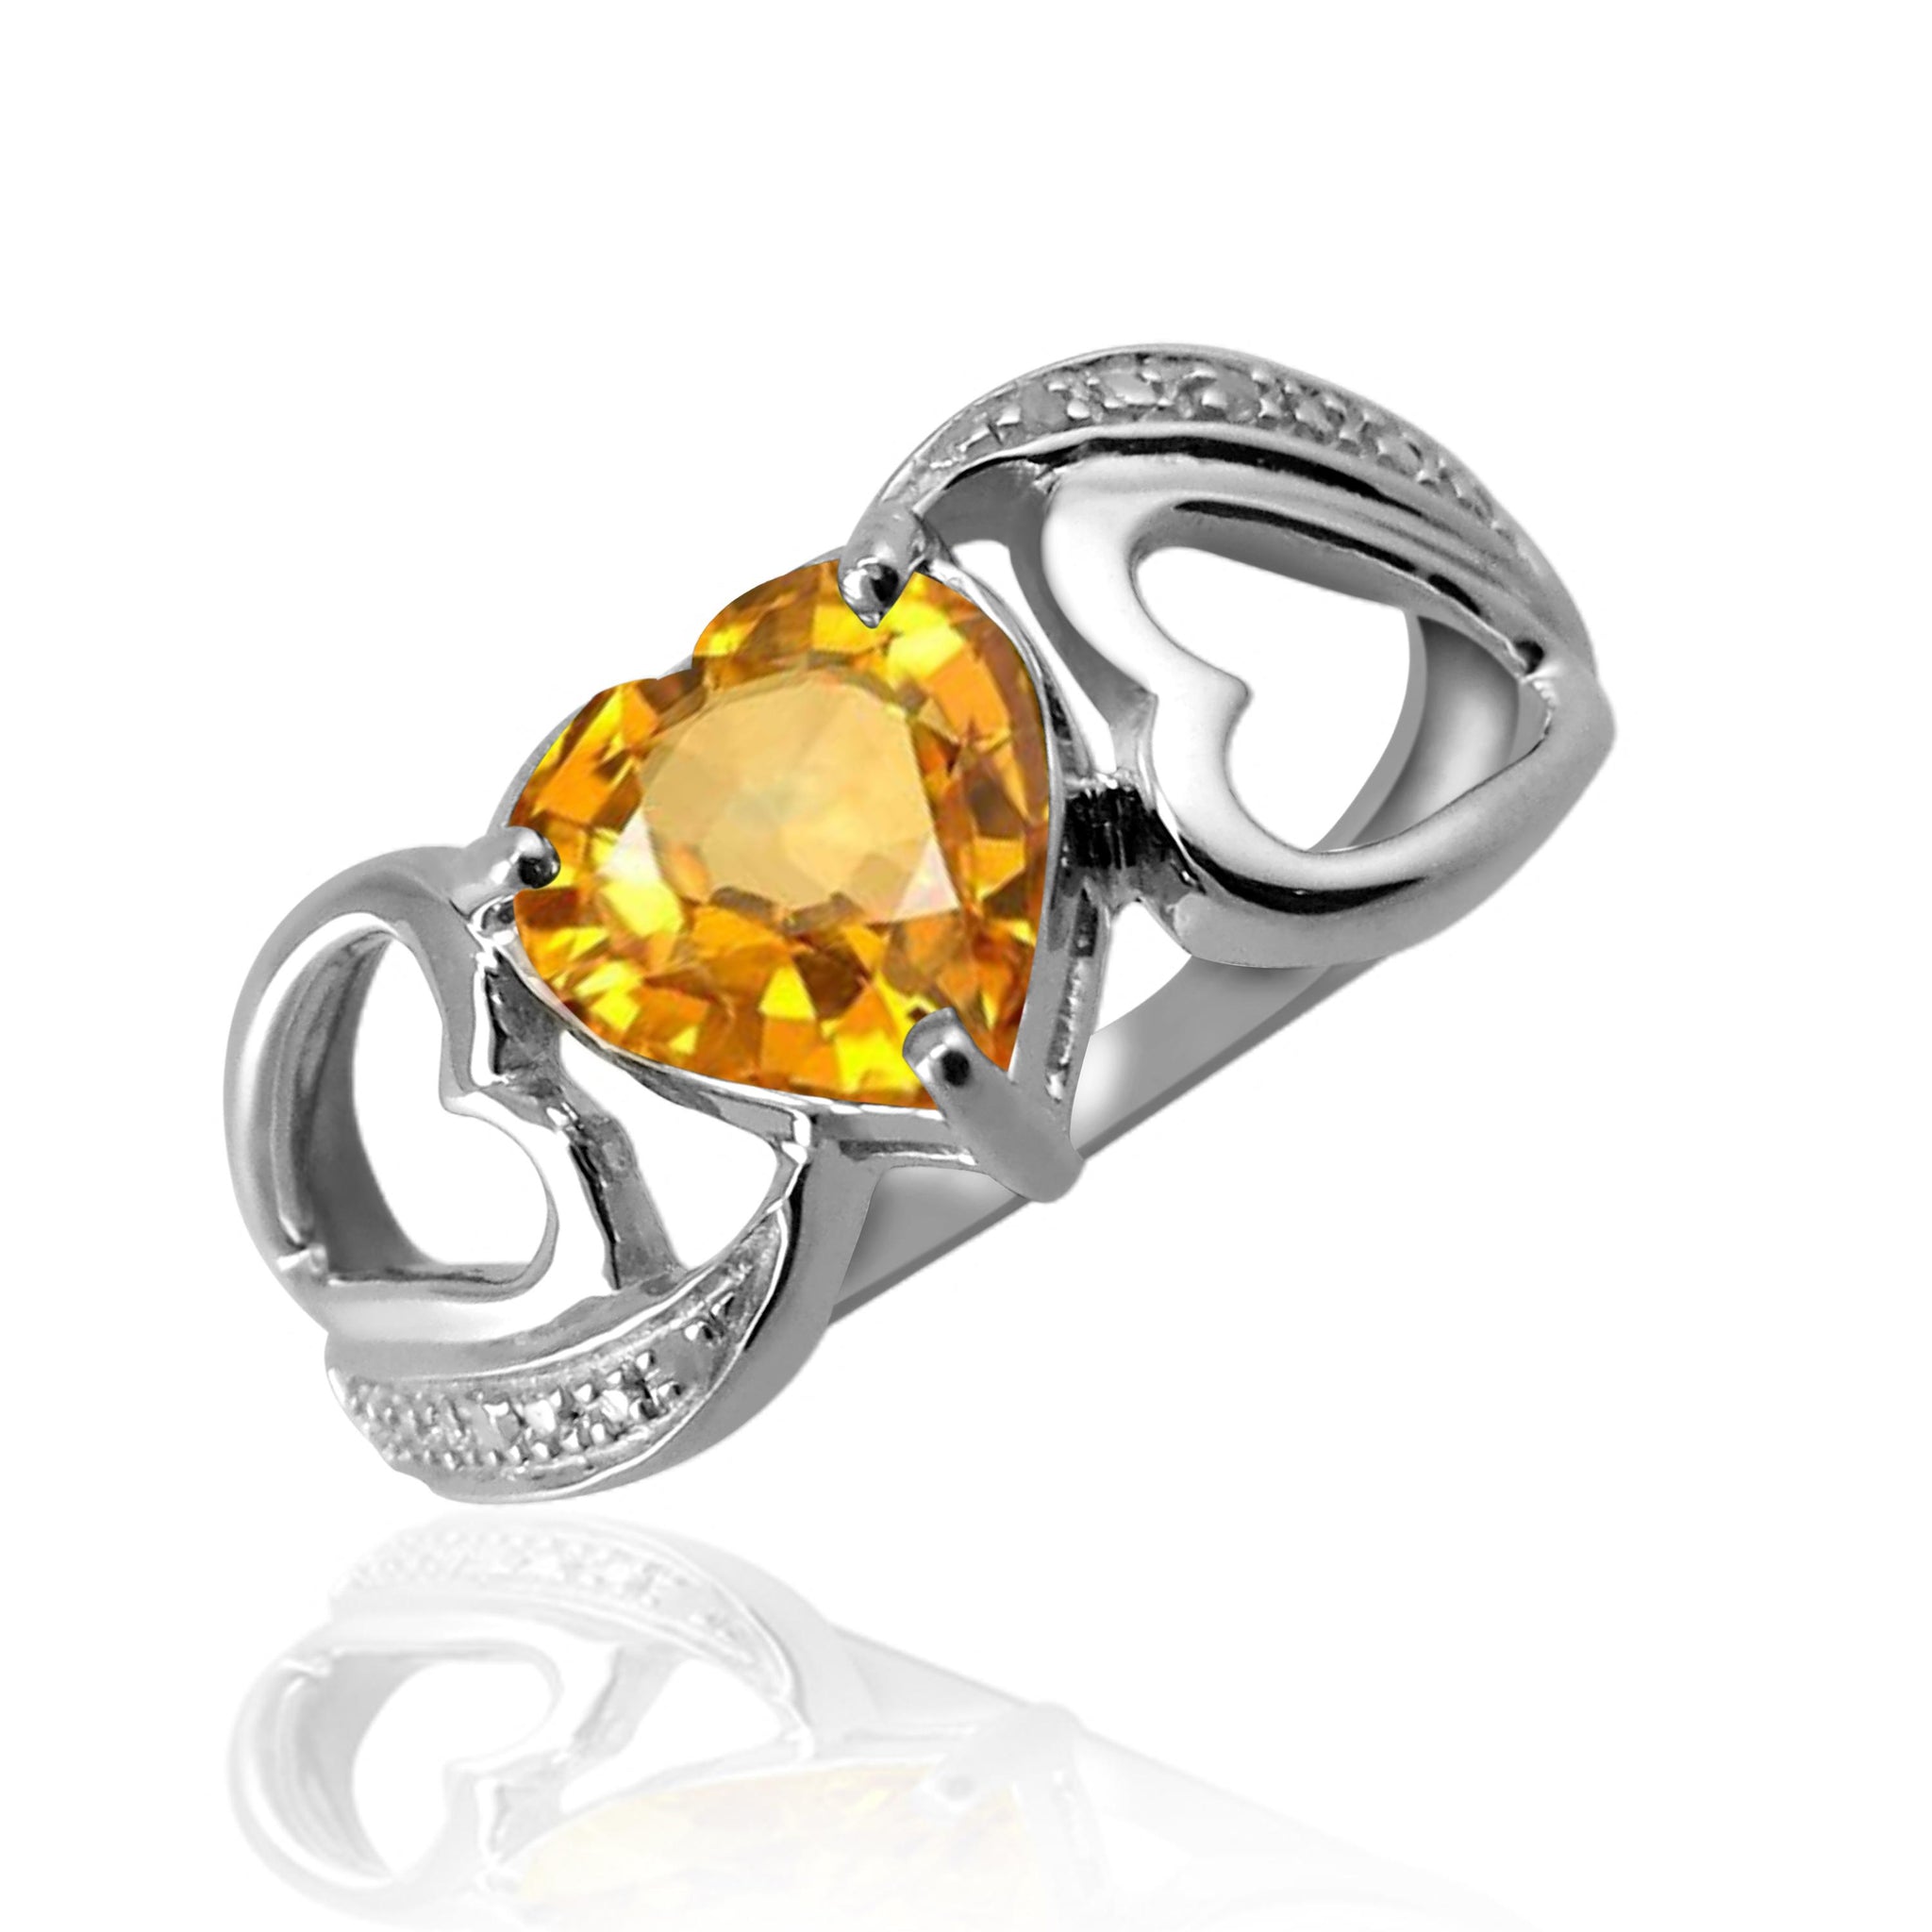 JewelonFire 1 1/2 Carat T.G.W. Citrine And White Diamond Accent Sterling Silver Ring